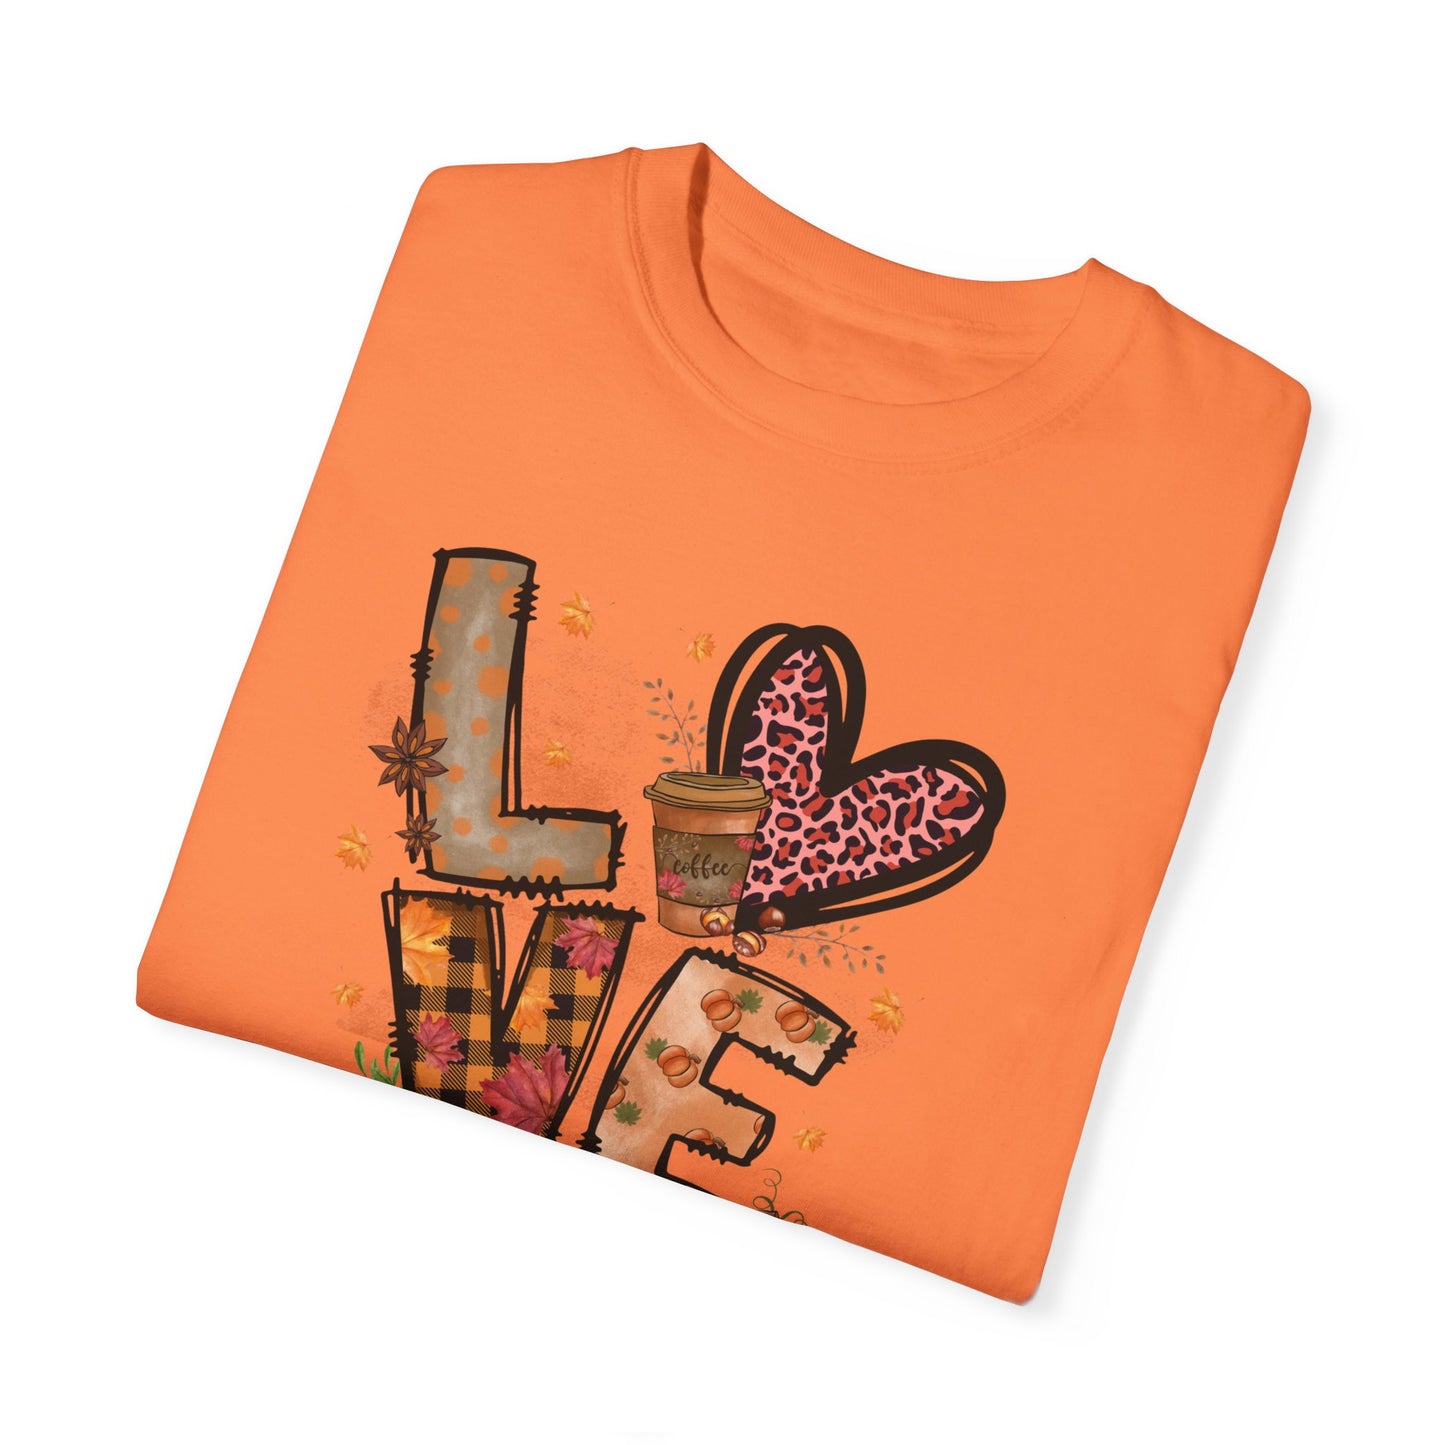 LOVE Fall Yall T-Shirt With Leaves and Pumpkin